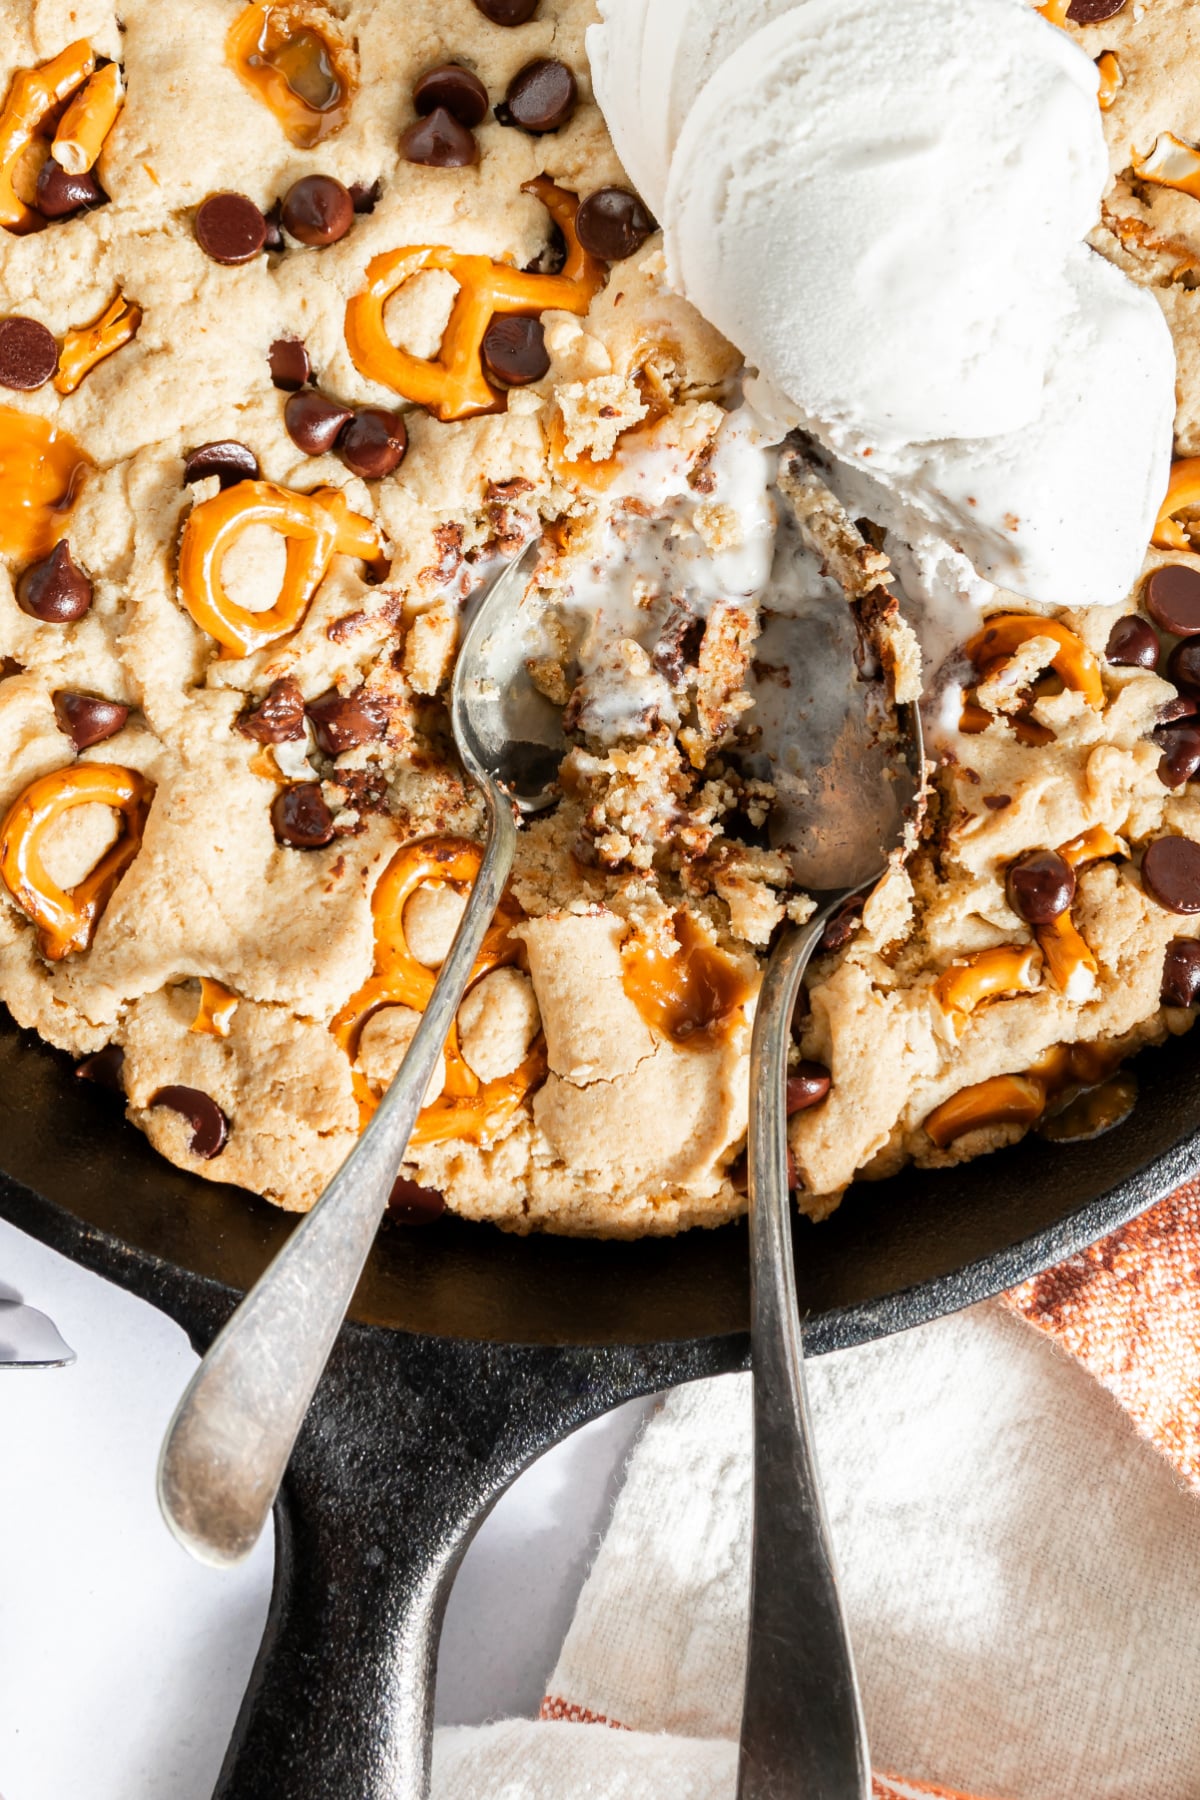 Overhead view of a baked skillet cookie with caramel, pretzels, and chocolate chips. Three scoops of vanilla ice cream melting on top, with two spoons digging into the cookie.